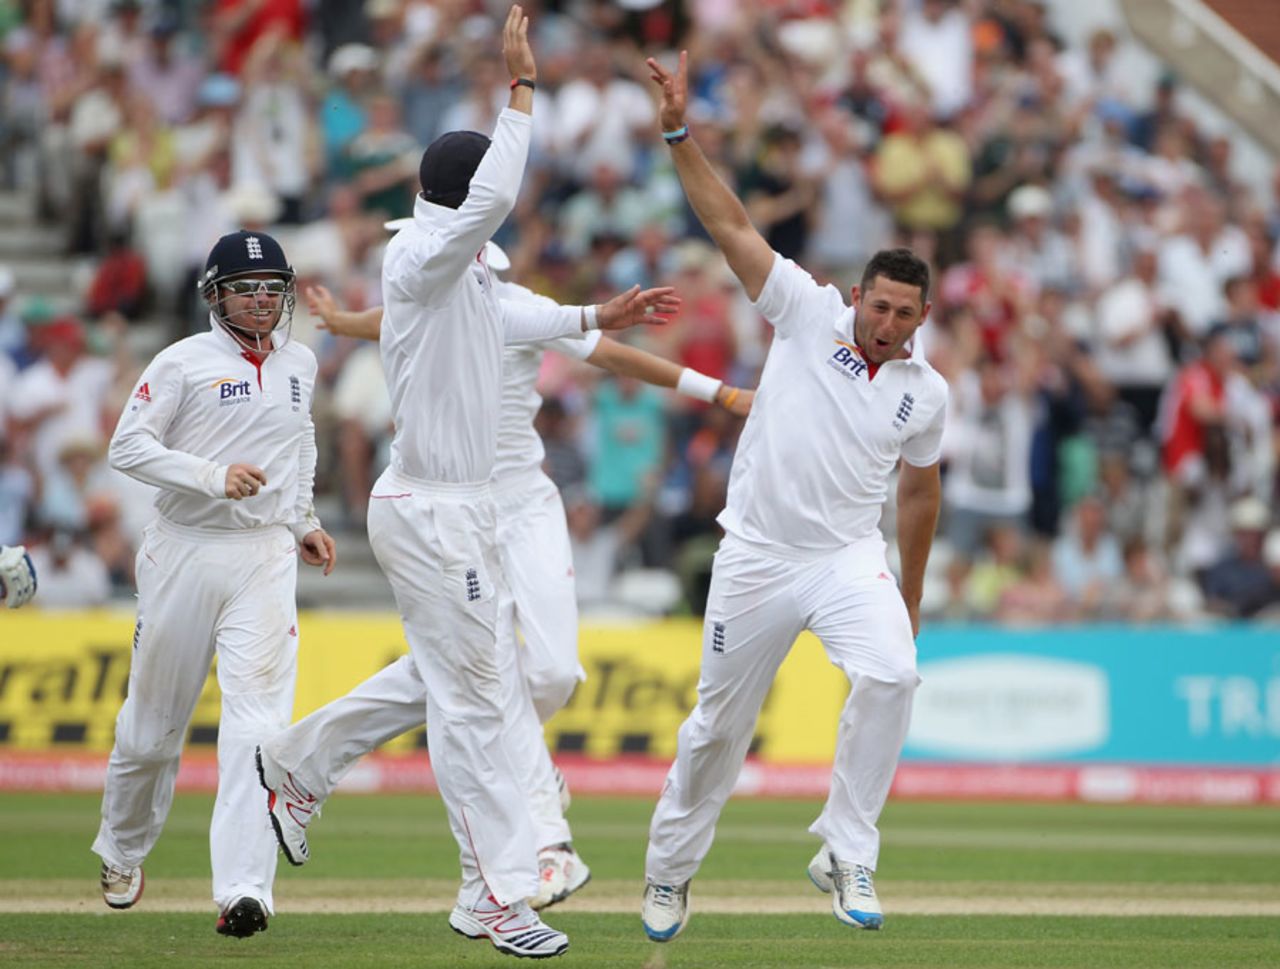 Tim Bresnan wrecked India's middle order with bounce, England v India, 2nd Test, Trent Bridge, 4th day, August 1, 2011